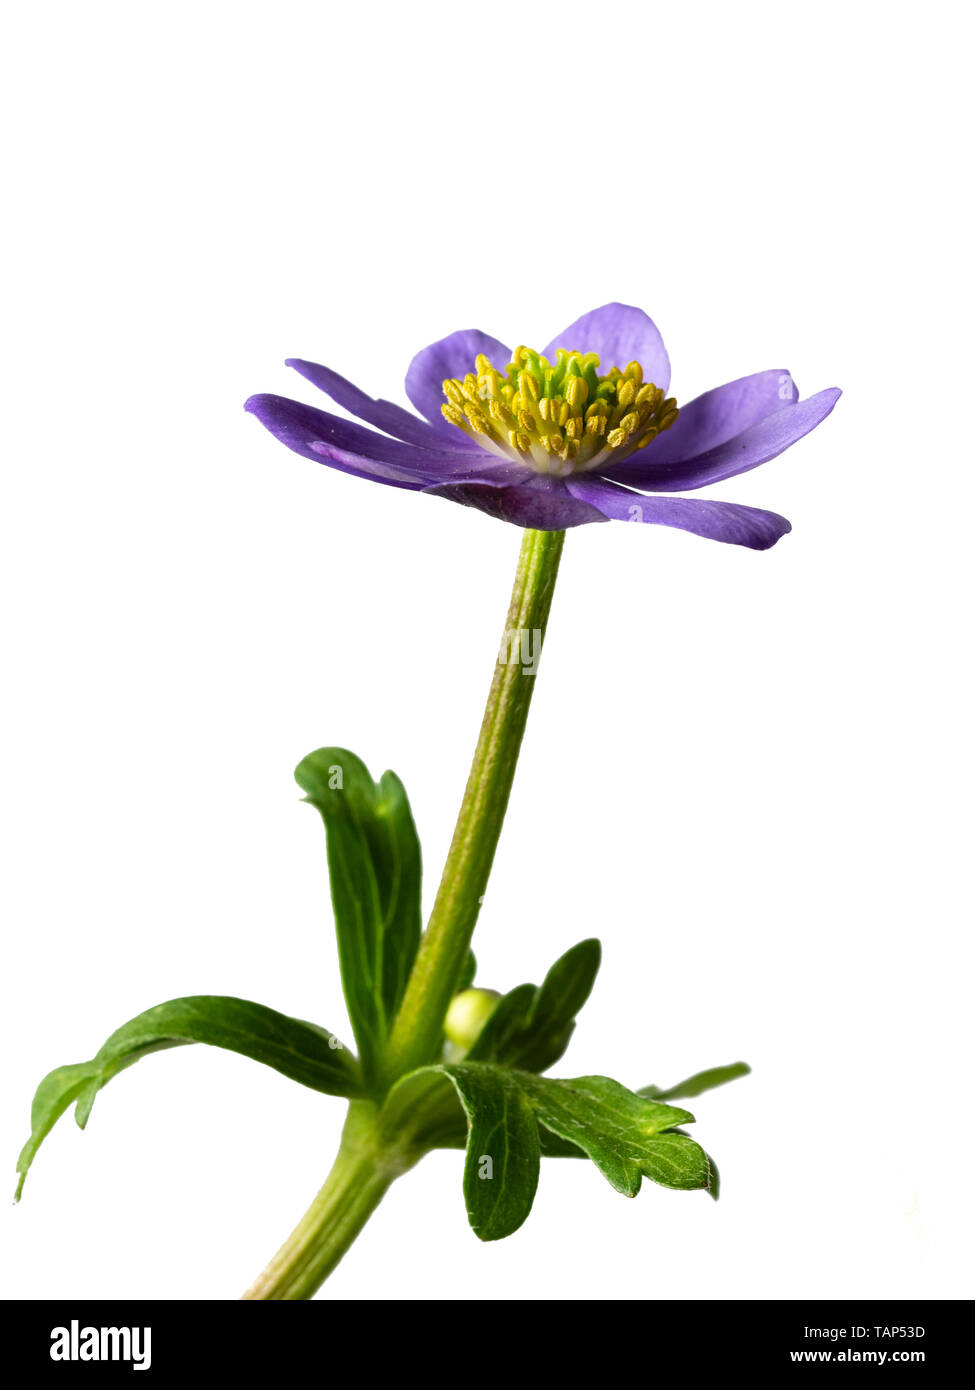 Single,large blue flower and stem foliage of the compact, shade loving perennial, Anemone obtusiloba 'Big Blue', on a white background Stock Photo